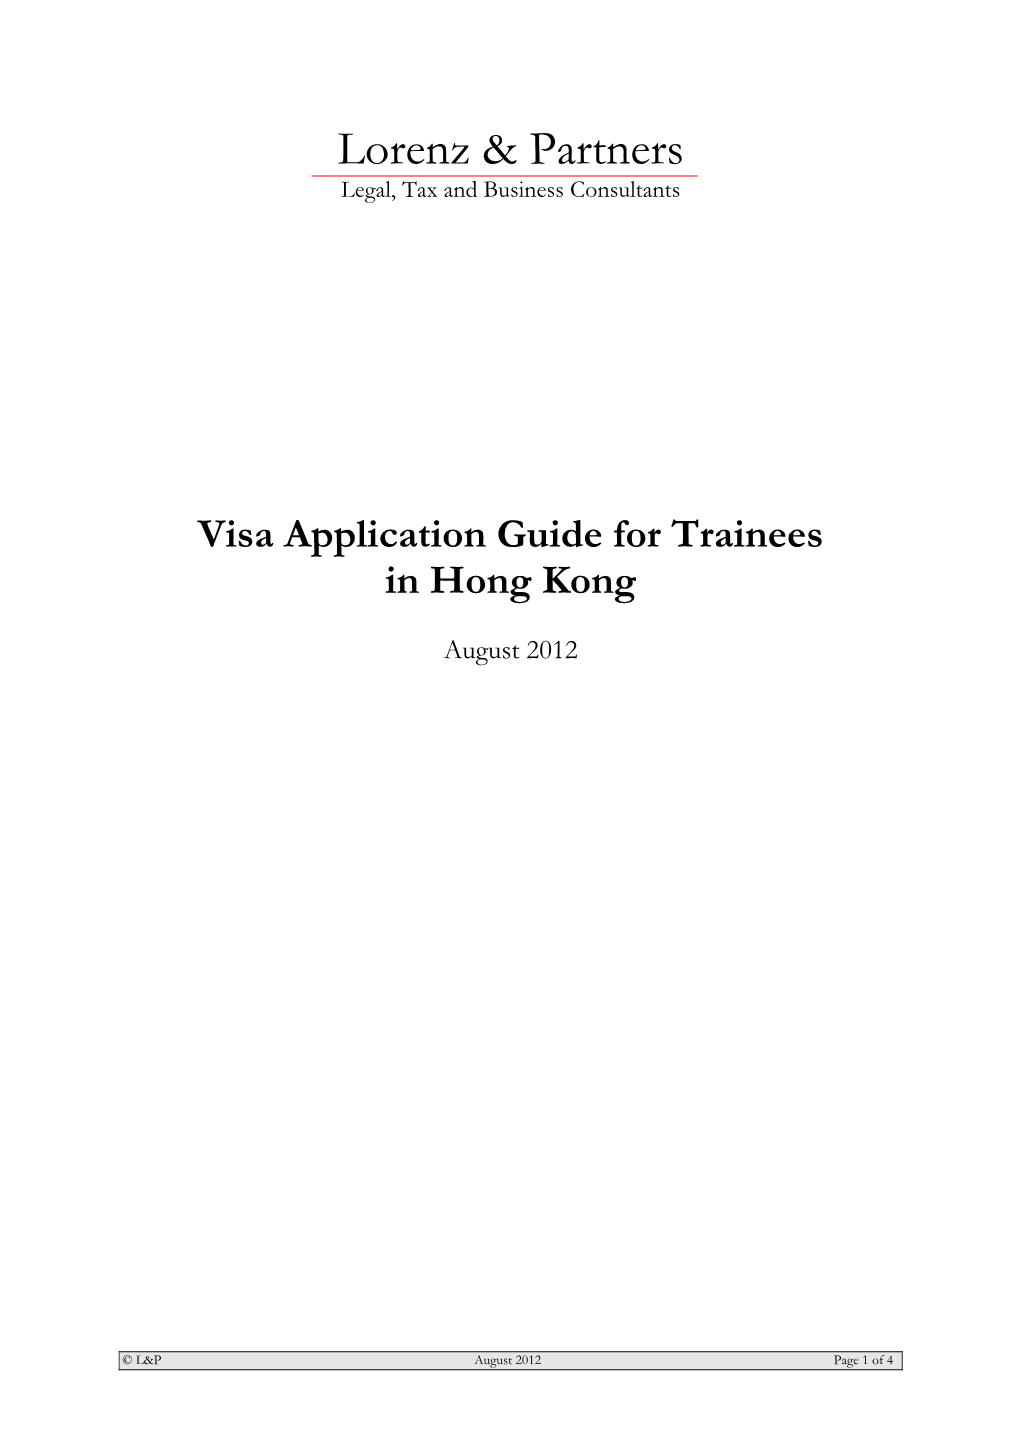 Visa Application Guide for Trainees in Hong Kong